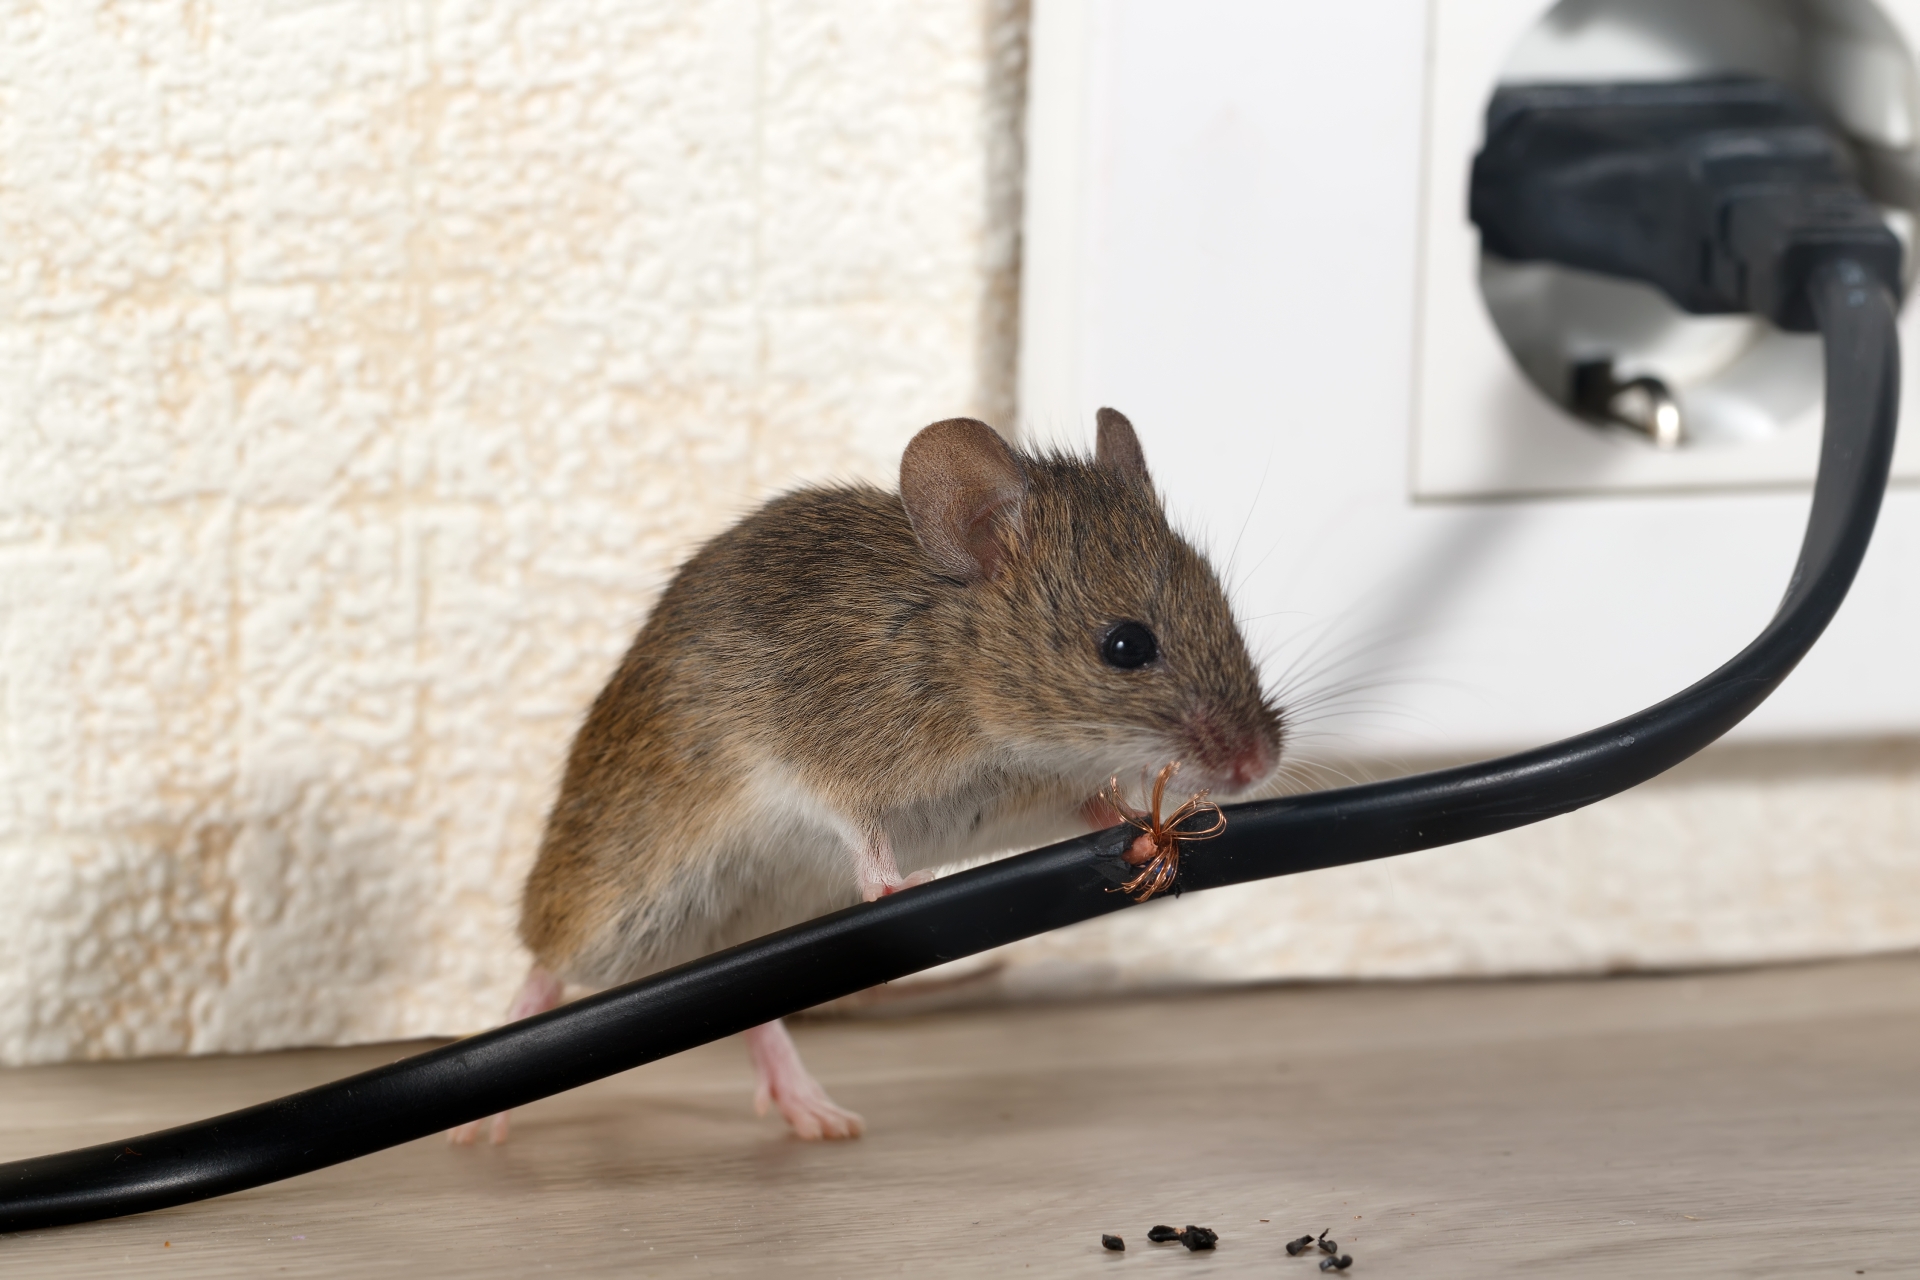 Mice Infestation, Pest Control in Collier Row, RM5. Call Now 020 8166 9746